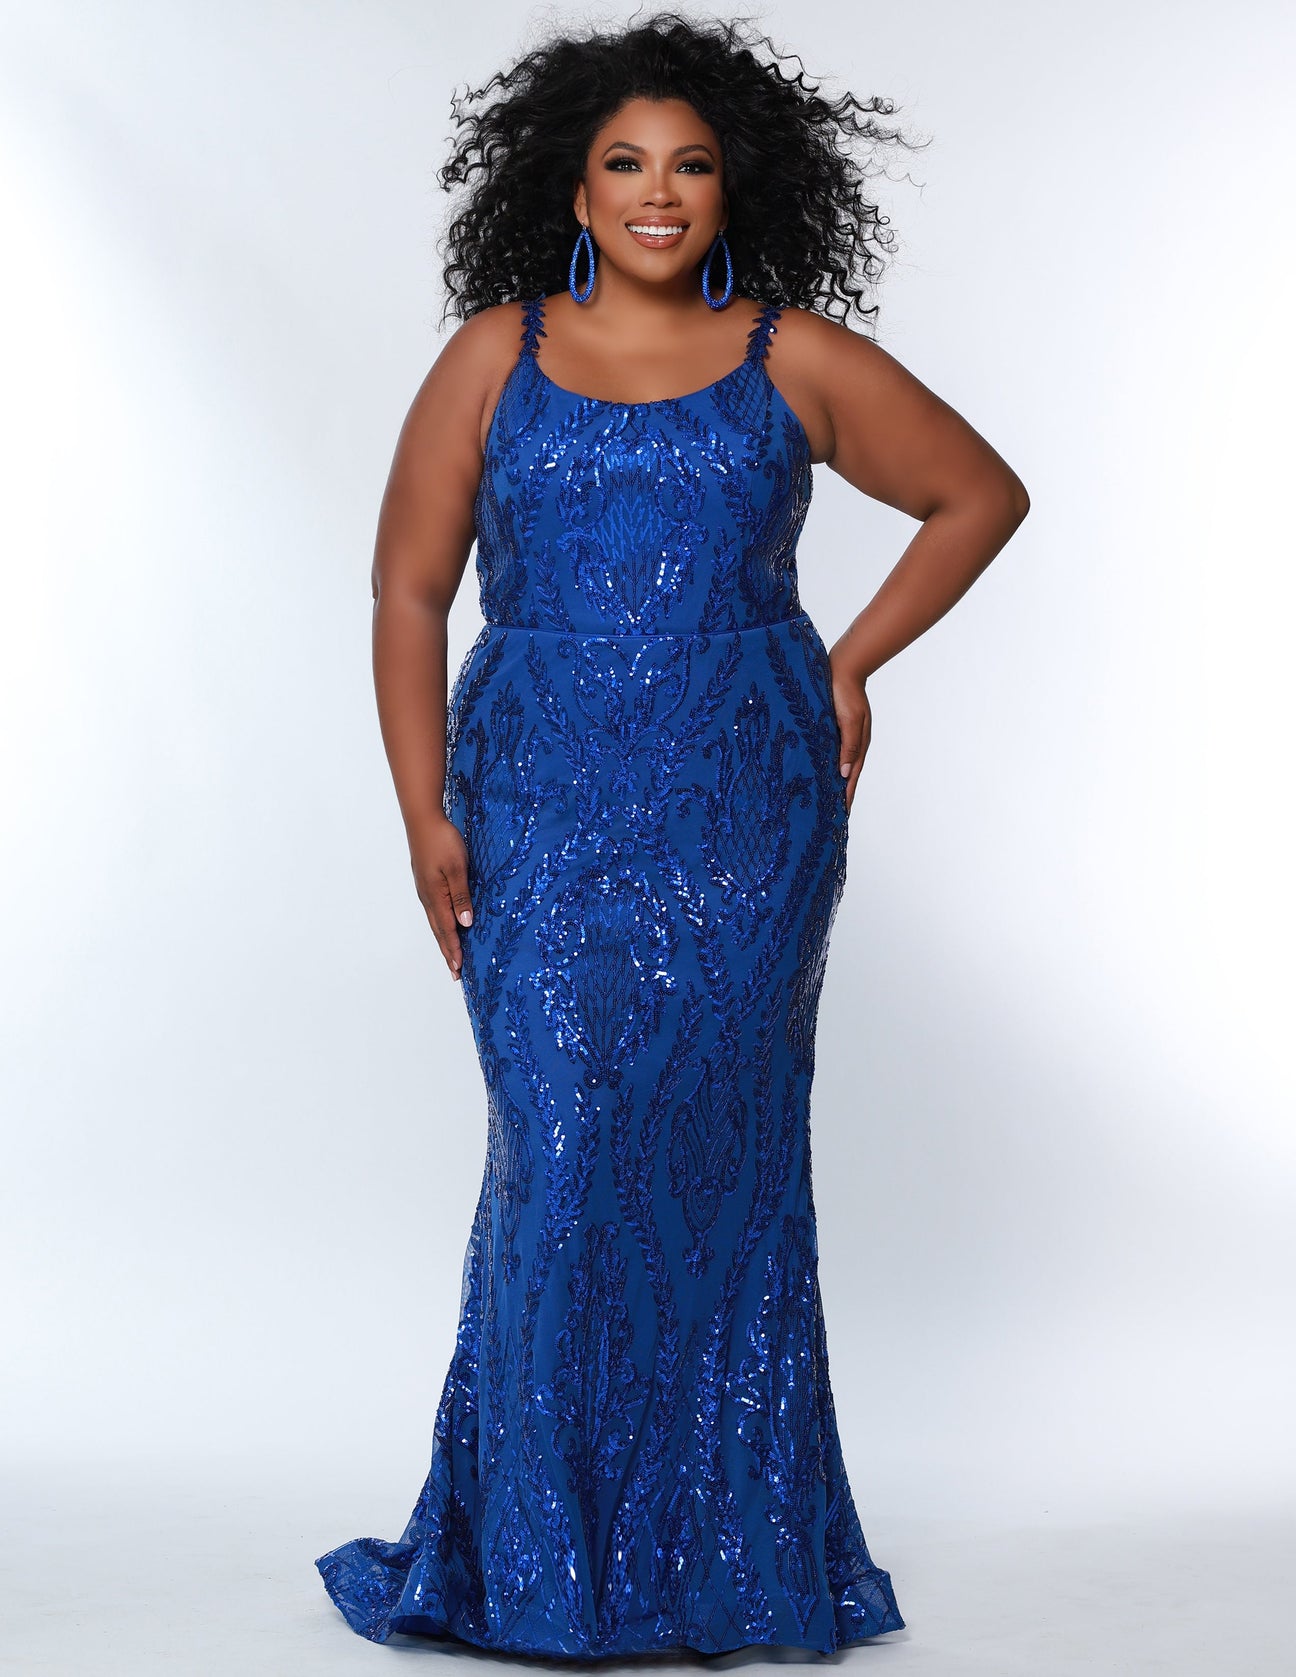 Plus Size Fitted Sequin Formal Dress | Sydney's Closet